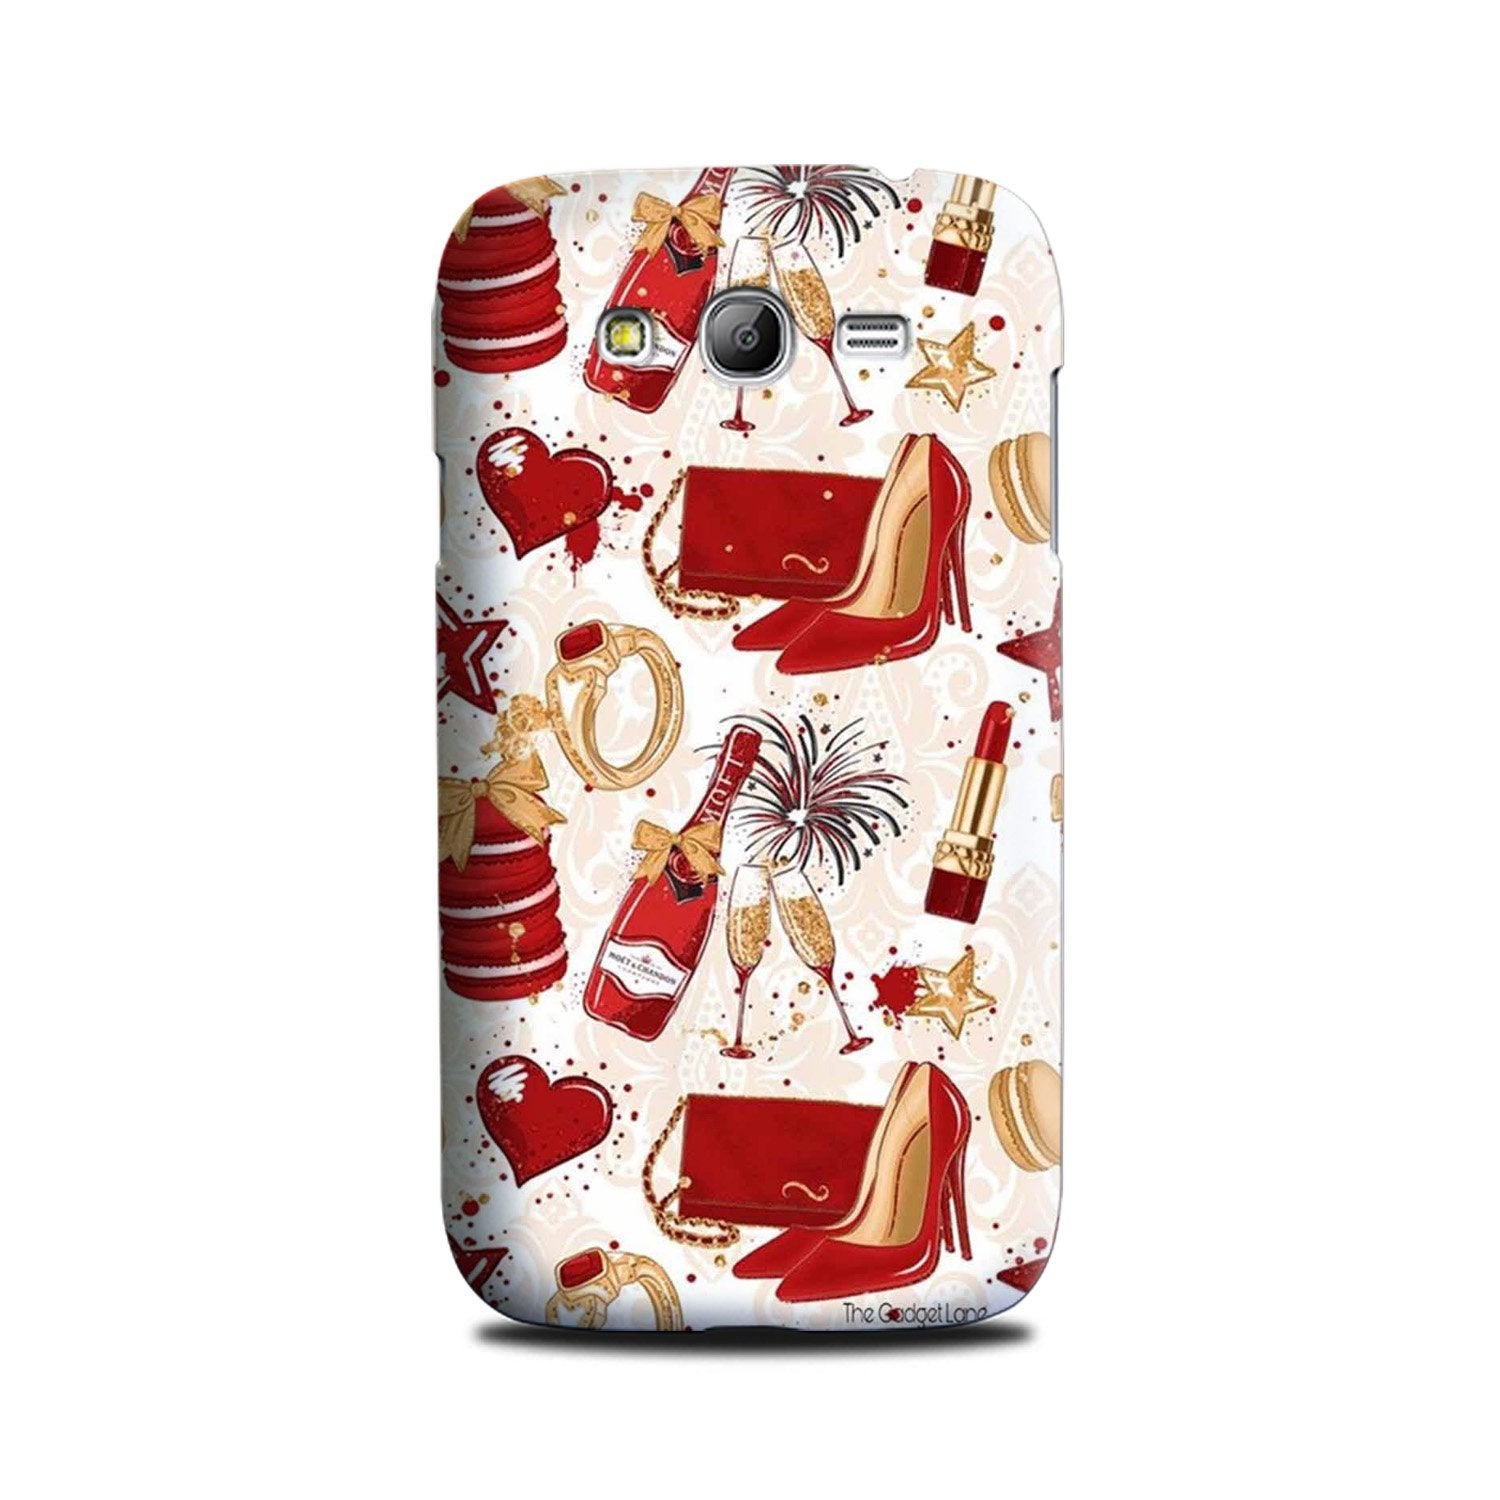 Girlish Mobile Back Case for Galaxy Grand Max  (Design - 312)